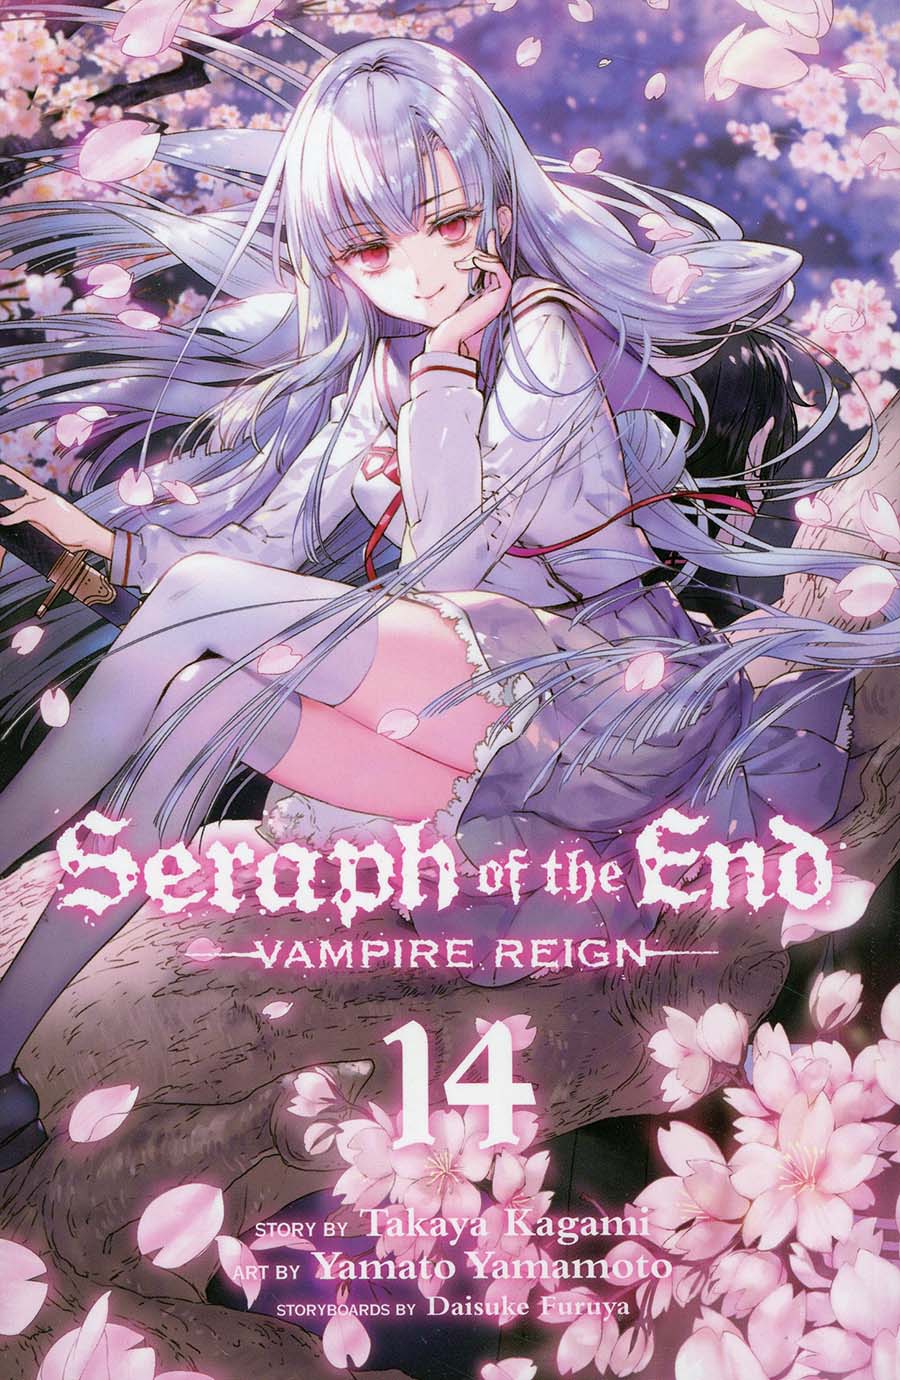 Seraph Of The End Vampire Reign Vol 14 TP